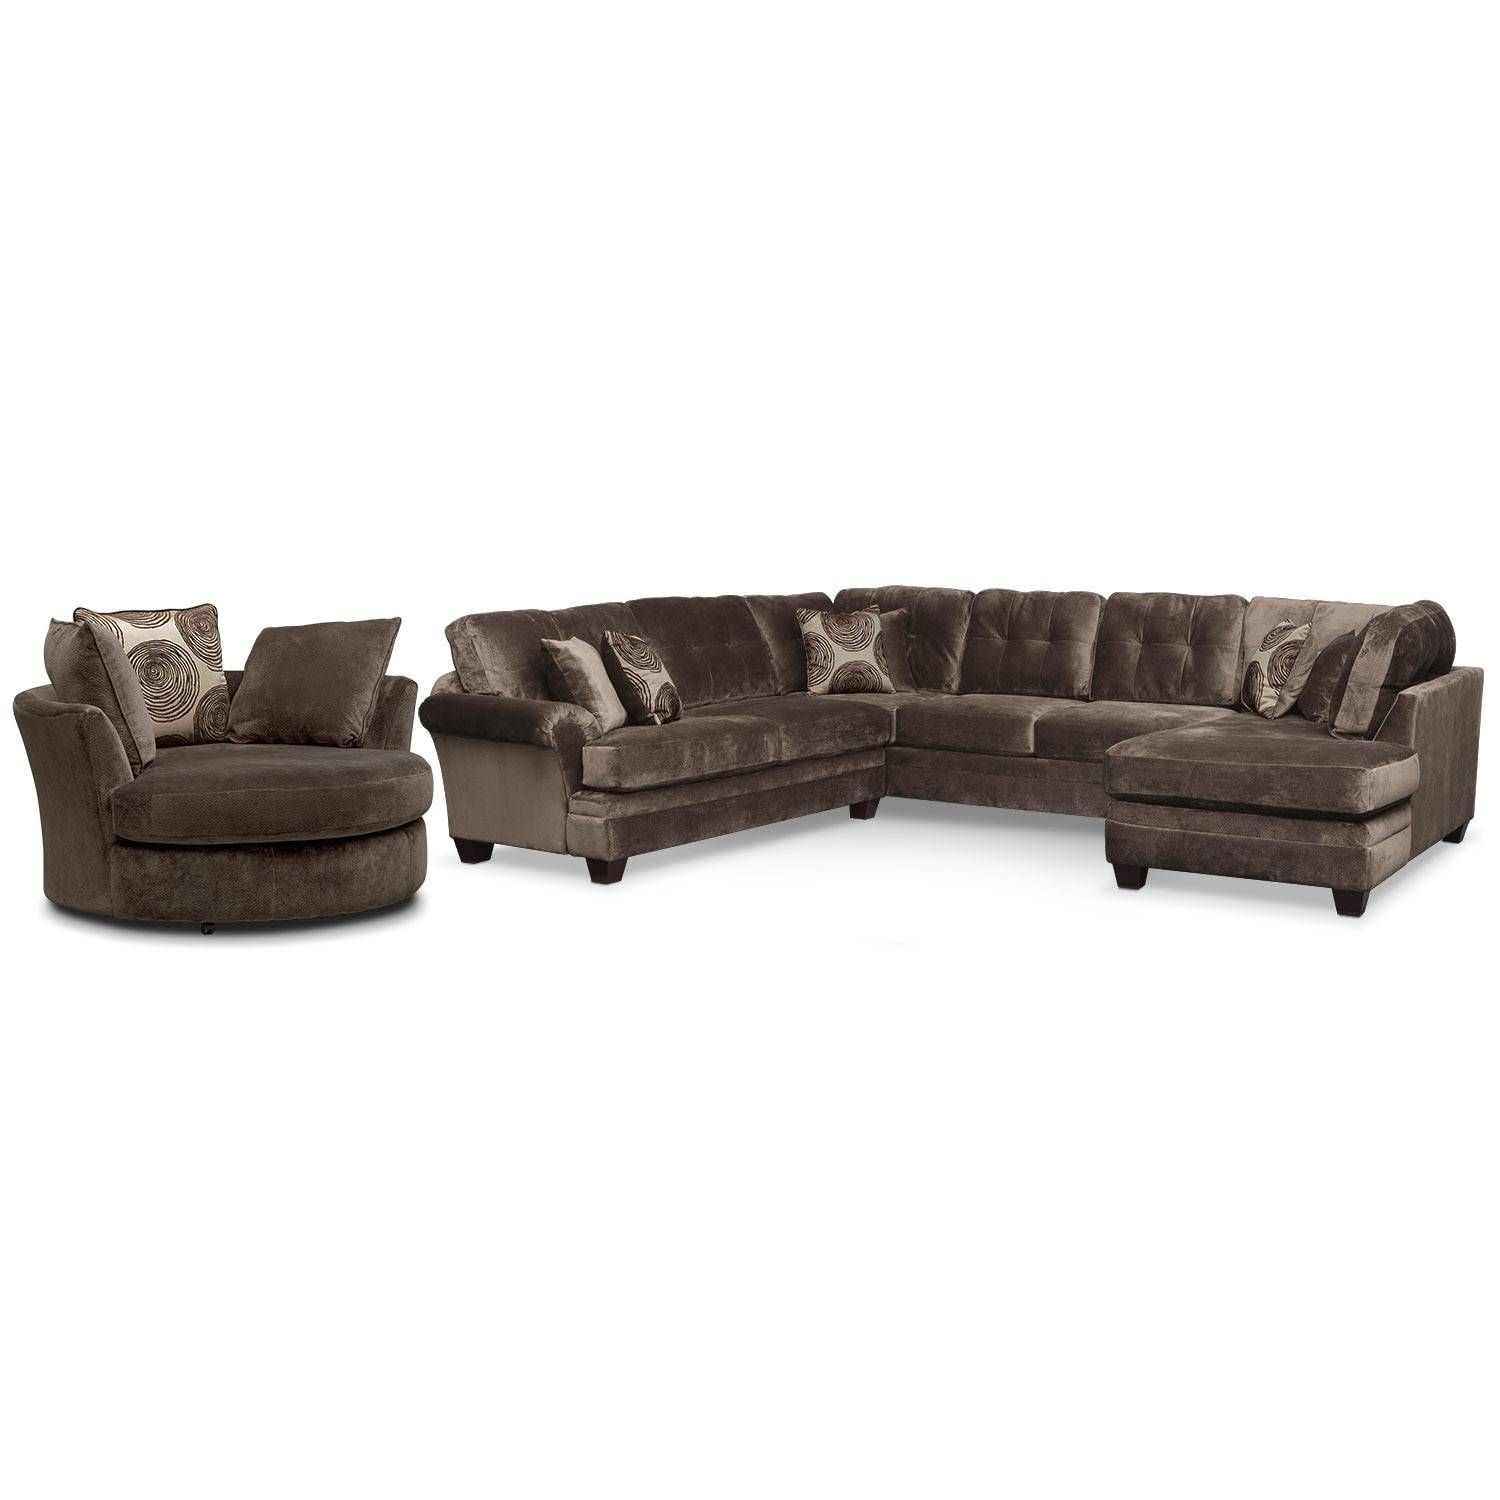 Cordelle 3 Piece Sectional And Swivel Chair Set – Chocolate With Sofa With Swivel Chair (View 24 of 30)